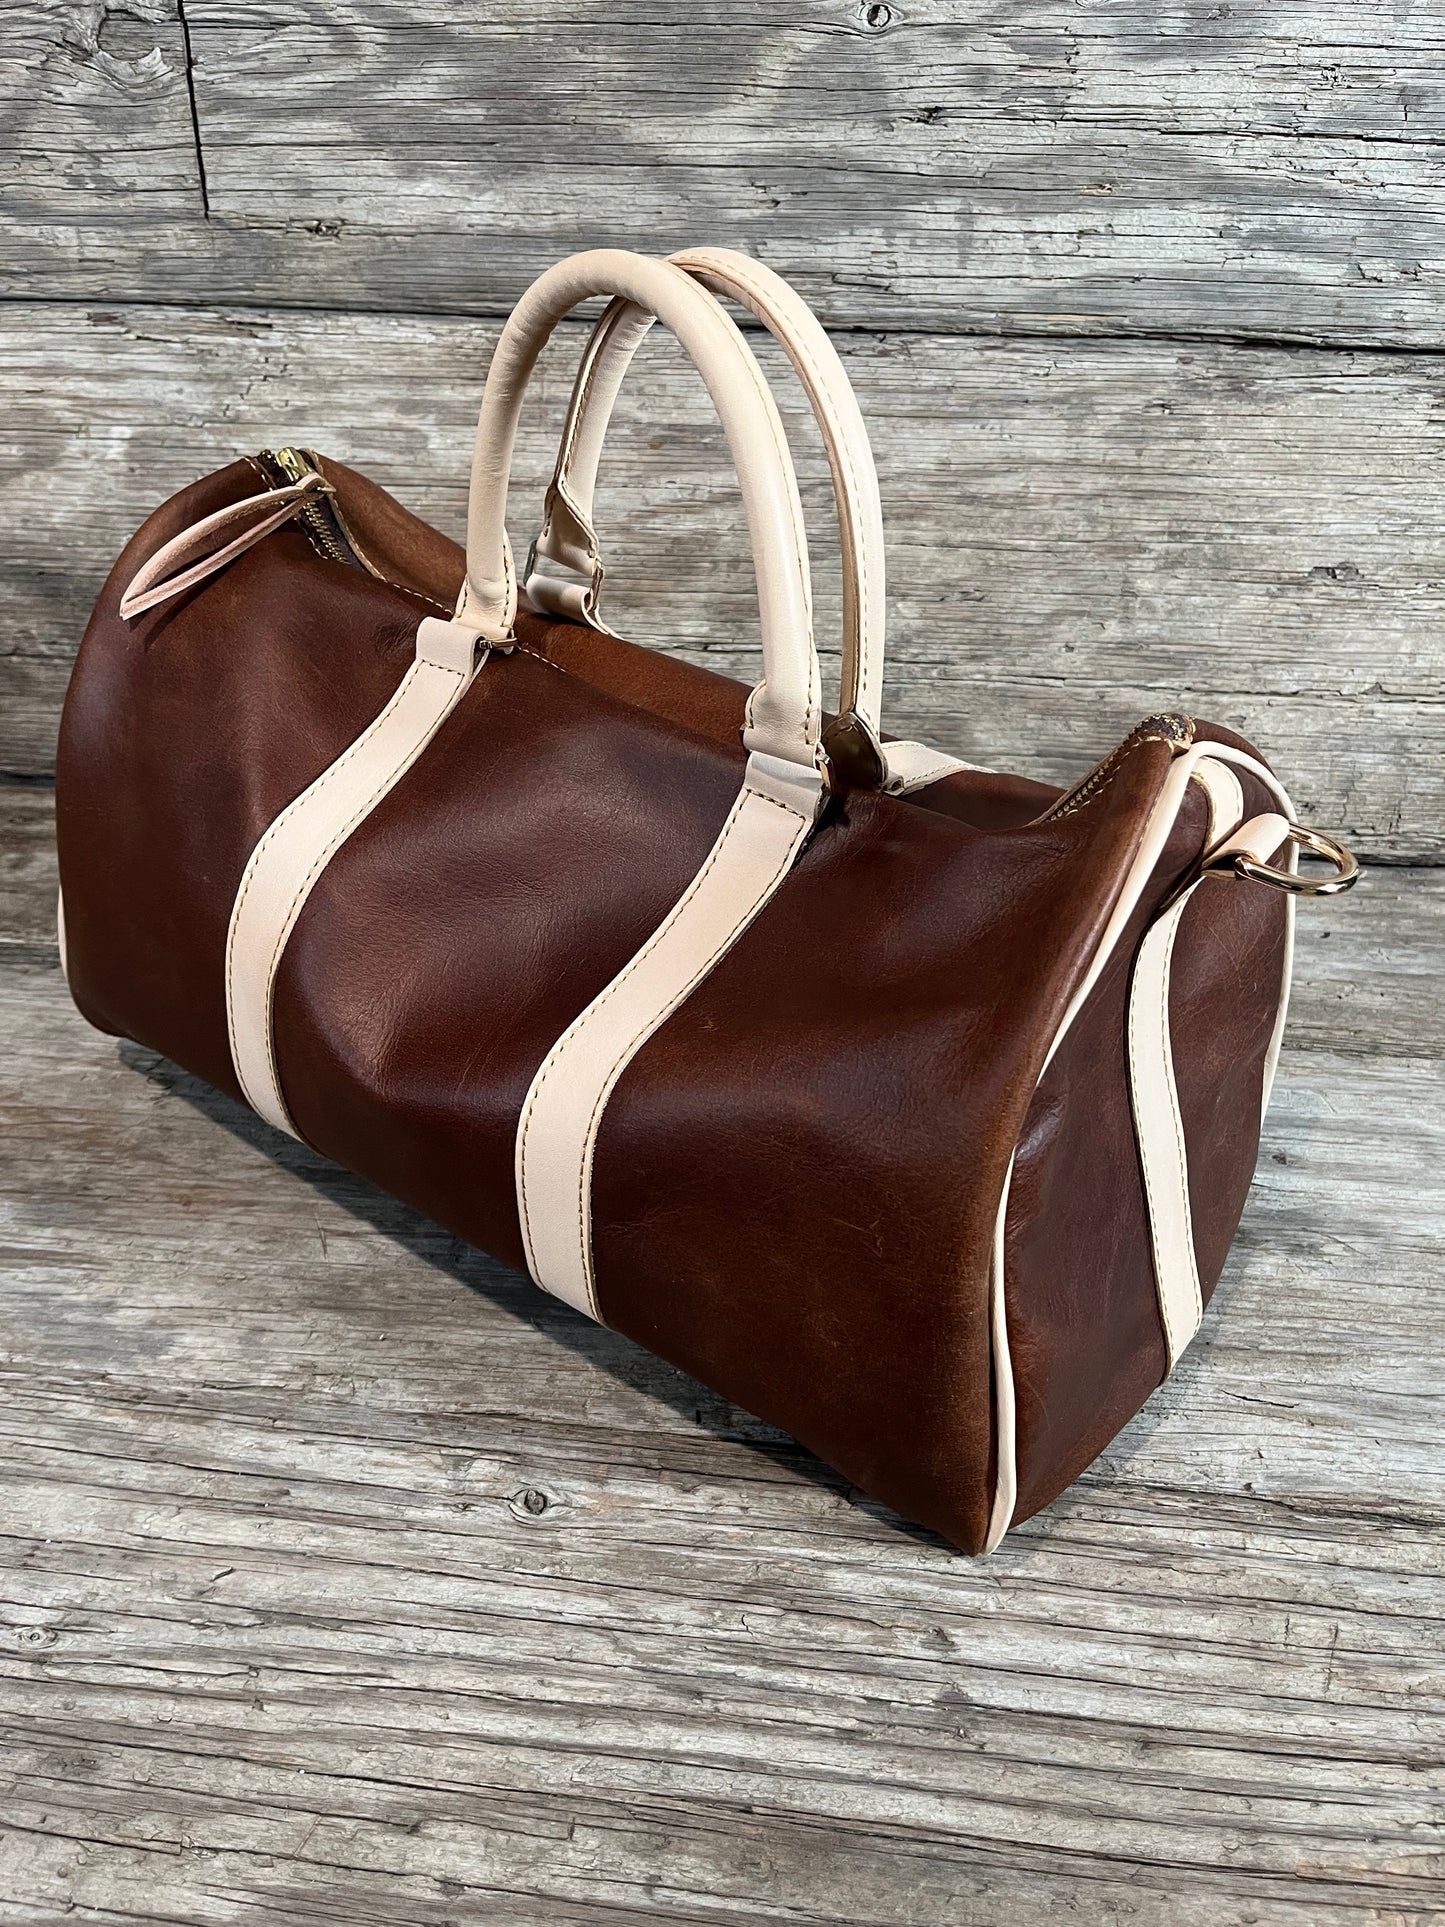 Prototype Sale-Carry on Luggage - Handmade Leather Bags, Classic Keeper-Brown/Natural